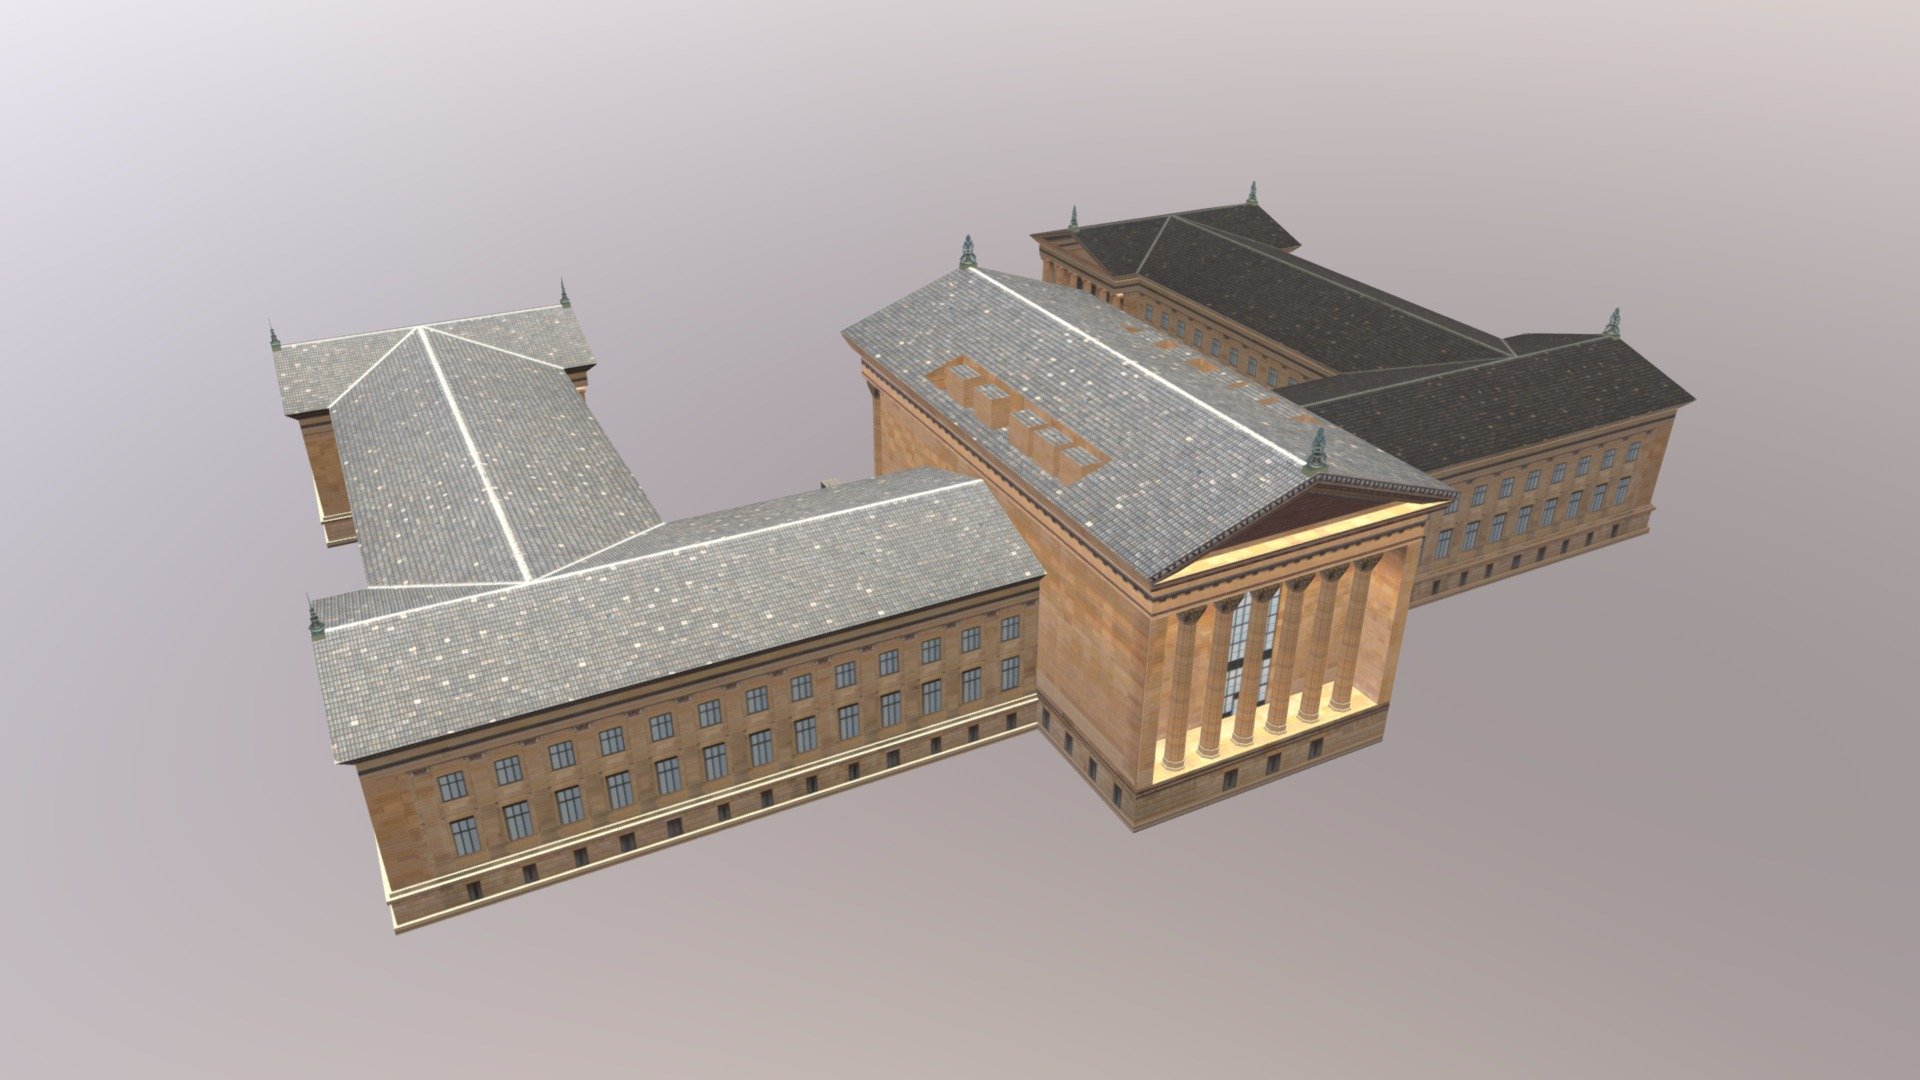 Low Poly The Philadelphia Museum of Art 3d  model.

https://nuralam3d.blogspot.com/2019/09/the-philadelphia-museum-of-art.html

Originally created with 3ds Max 2015 and rendered in mental ray 3d model